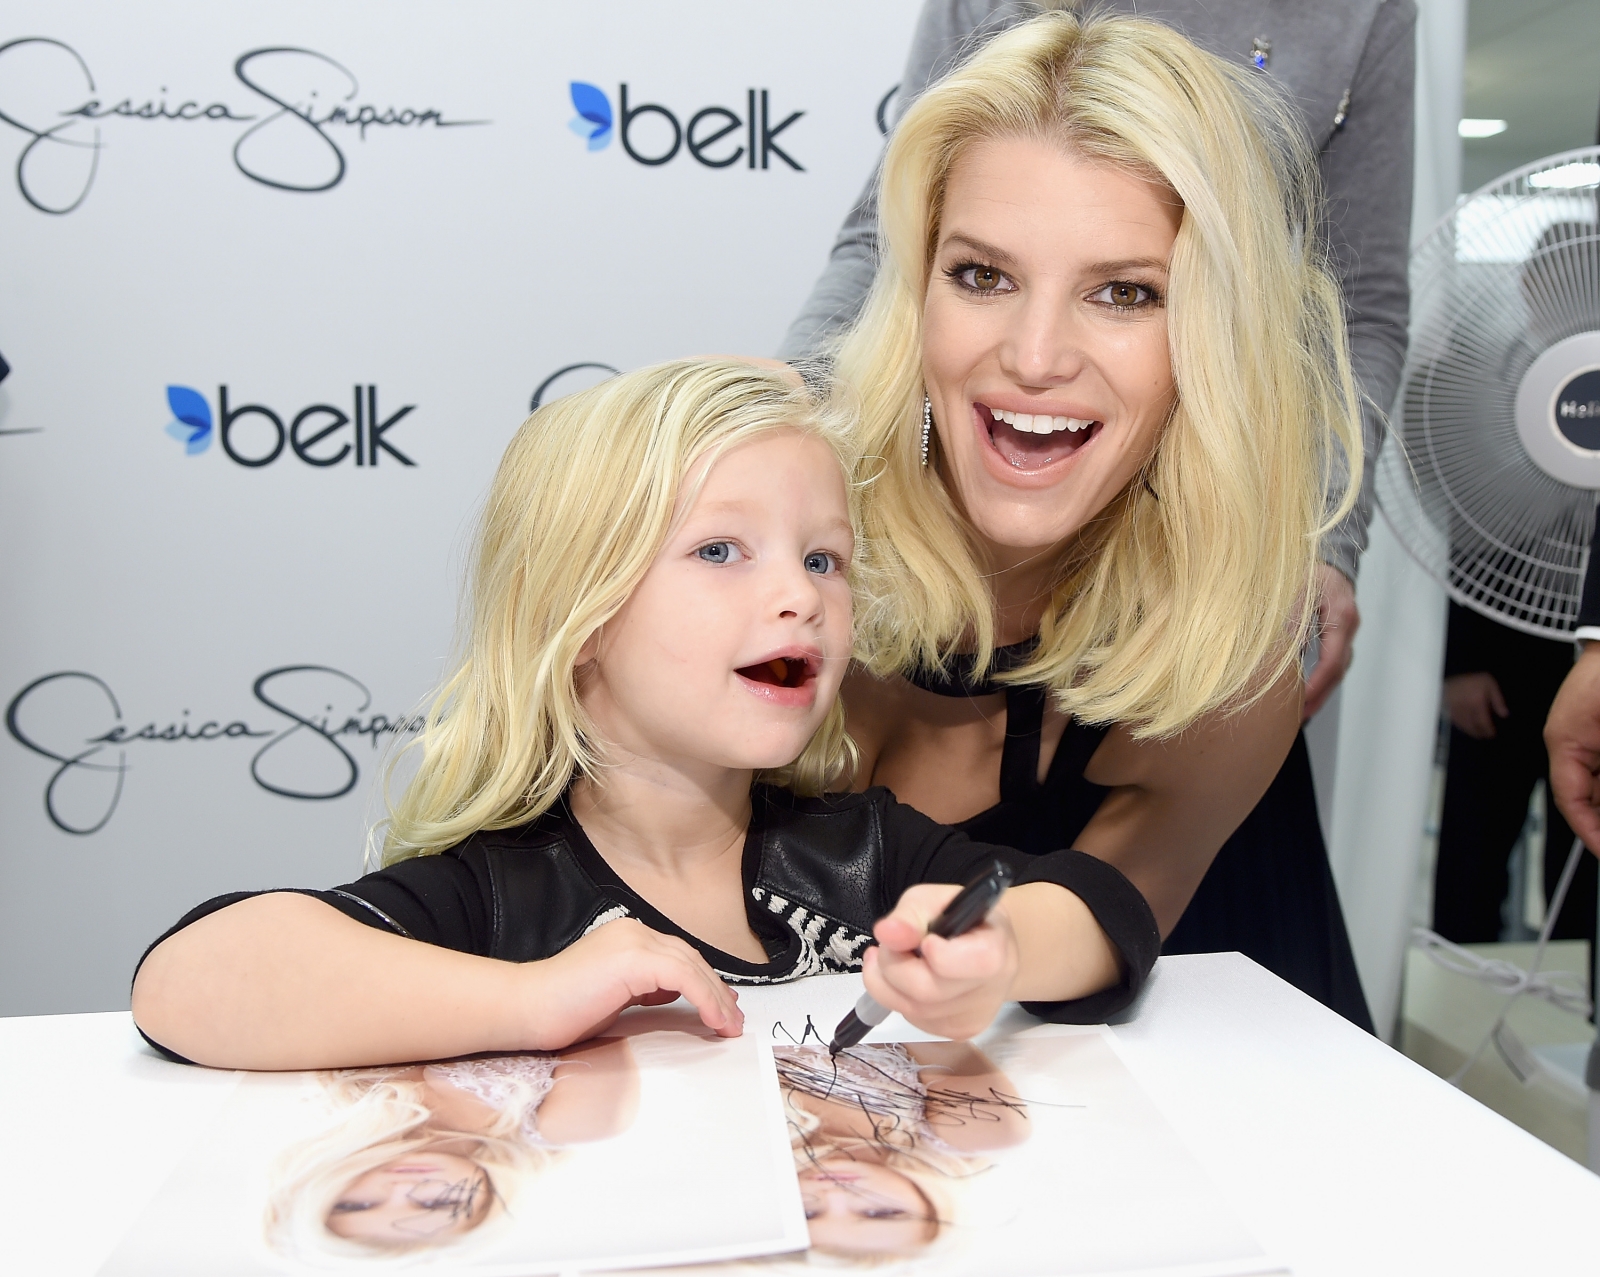 Jessica Simpson fans furious over her daughter's 'inappropriate